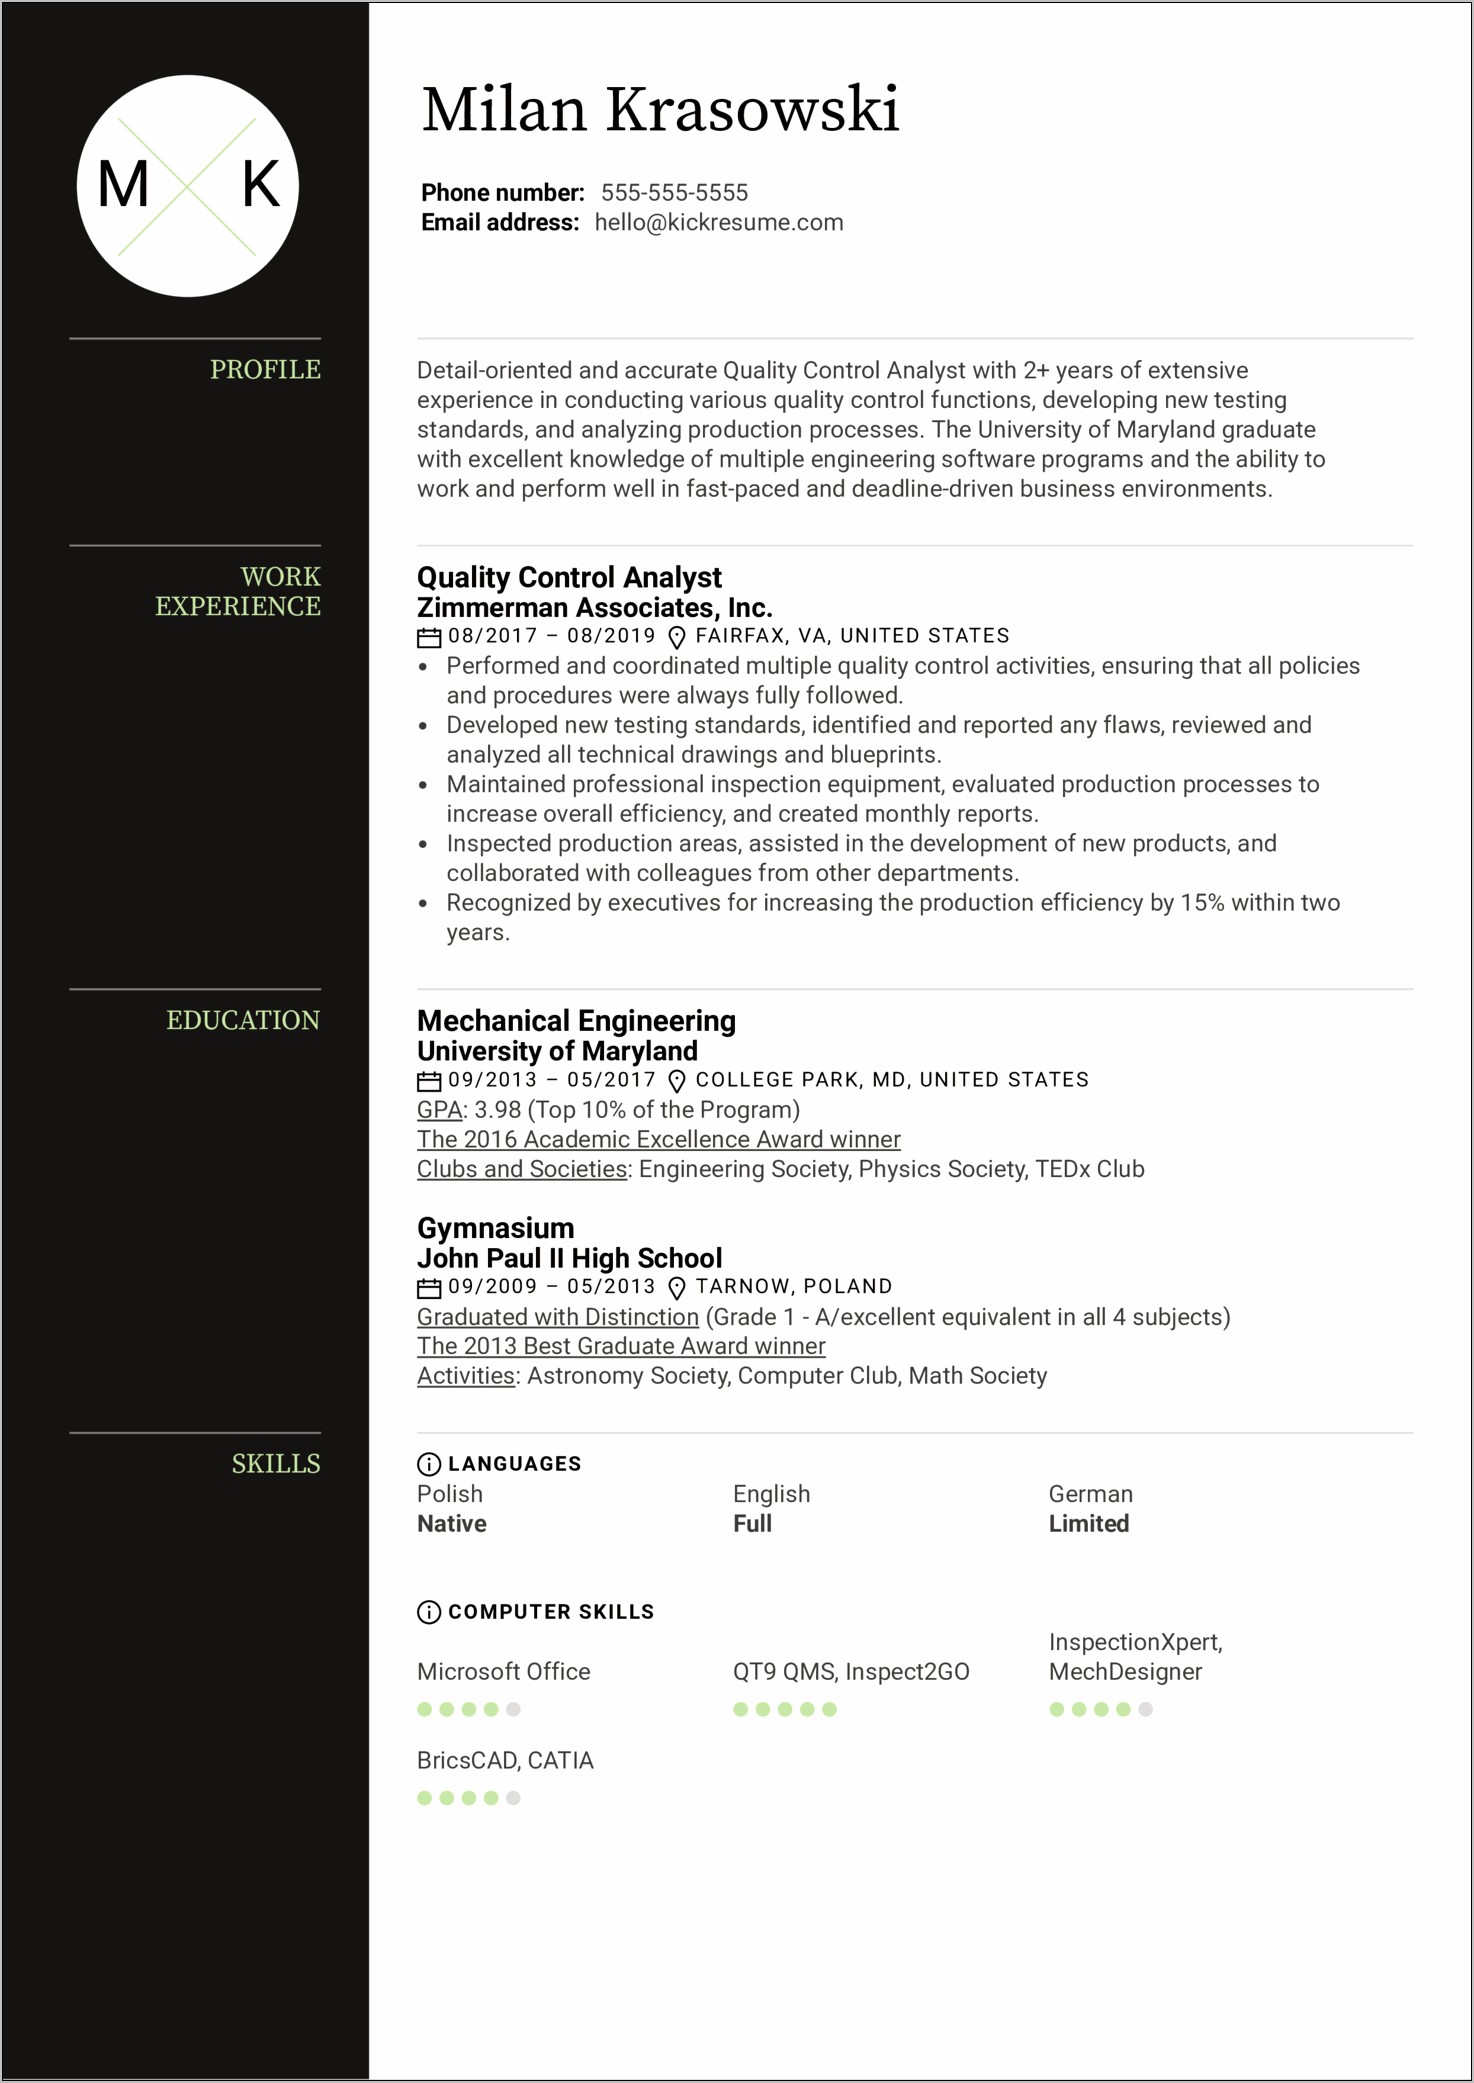 Resume Objective For Quality Assurance Technician